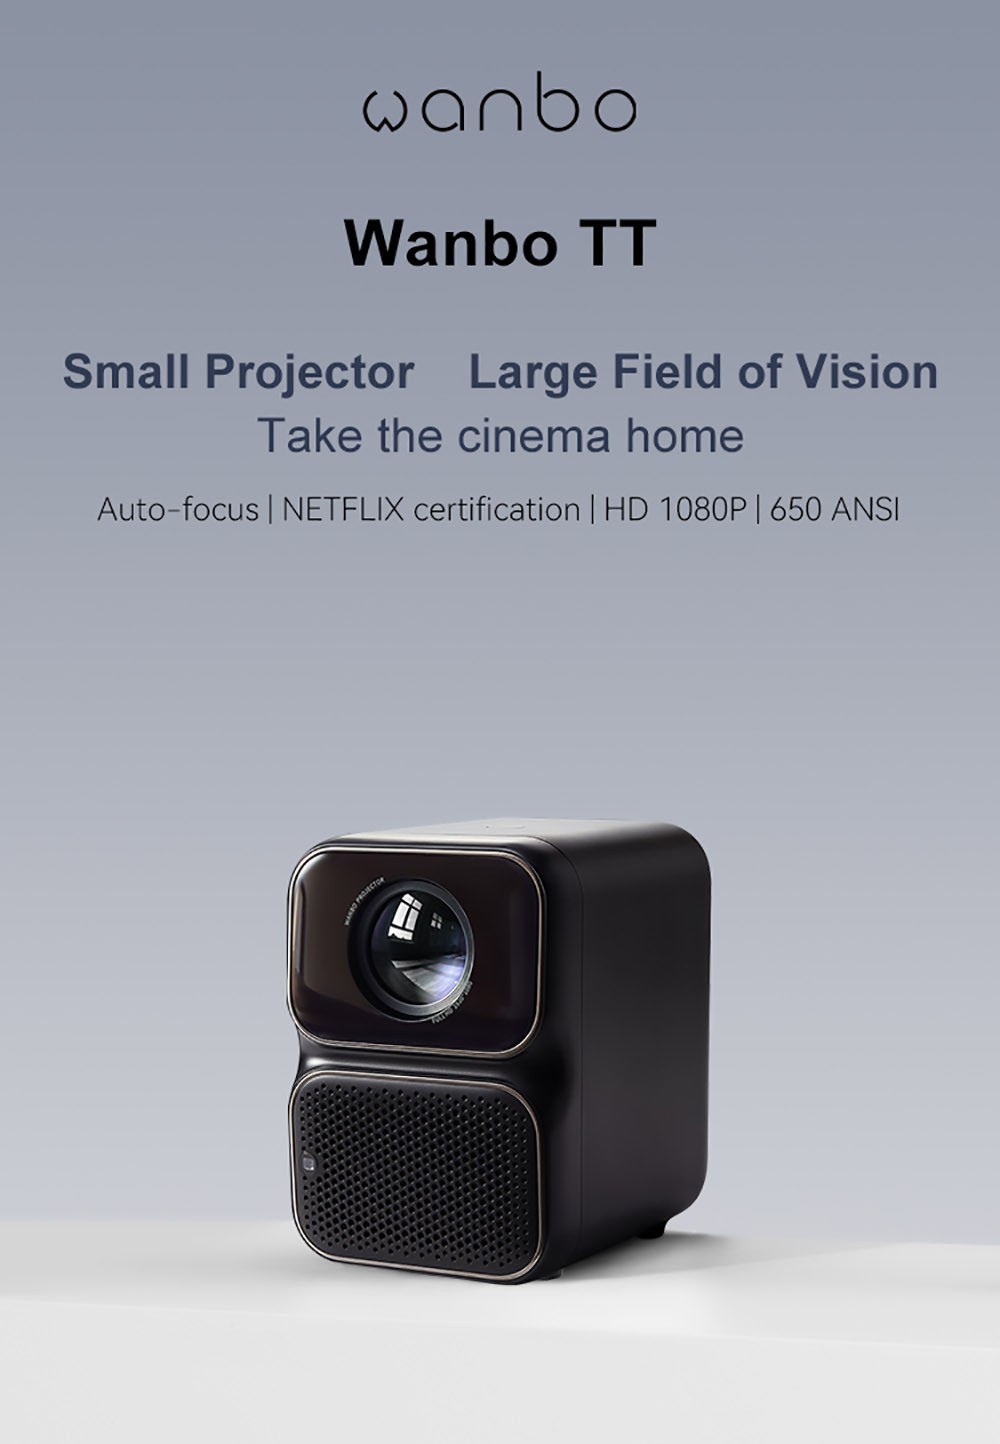 Wanbo TT 1080P LCD Projector, the Choice of Home Cinema